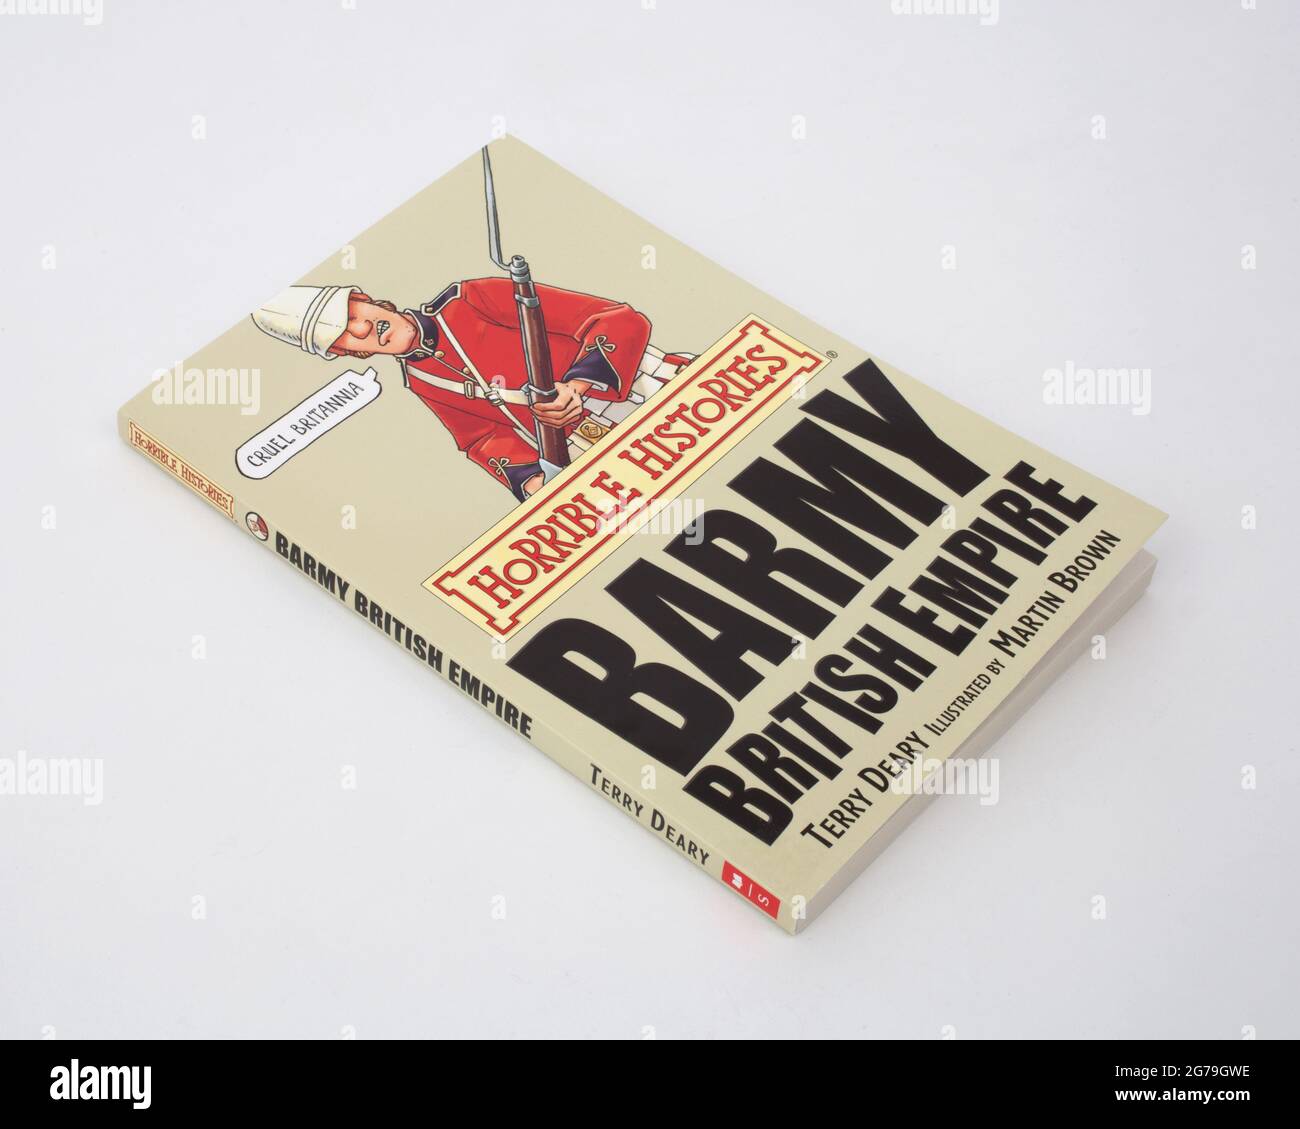 The book, Horrible Histories, Barmy British Empire by Terry Deary Stock Photo